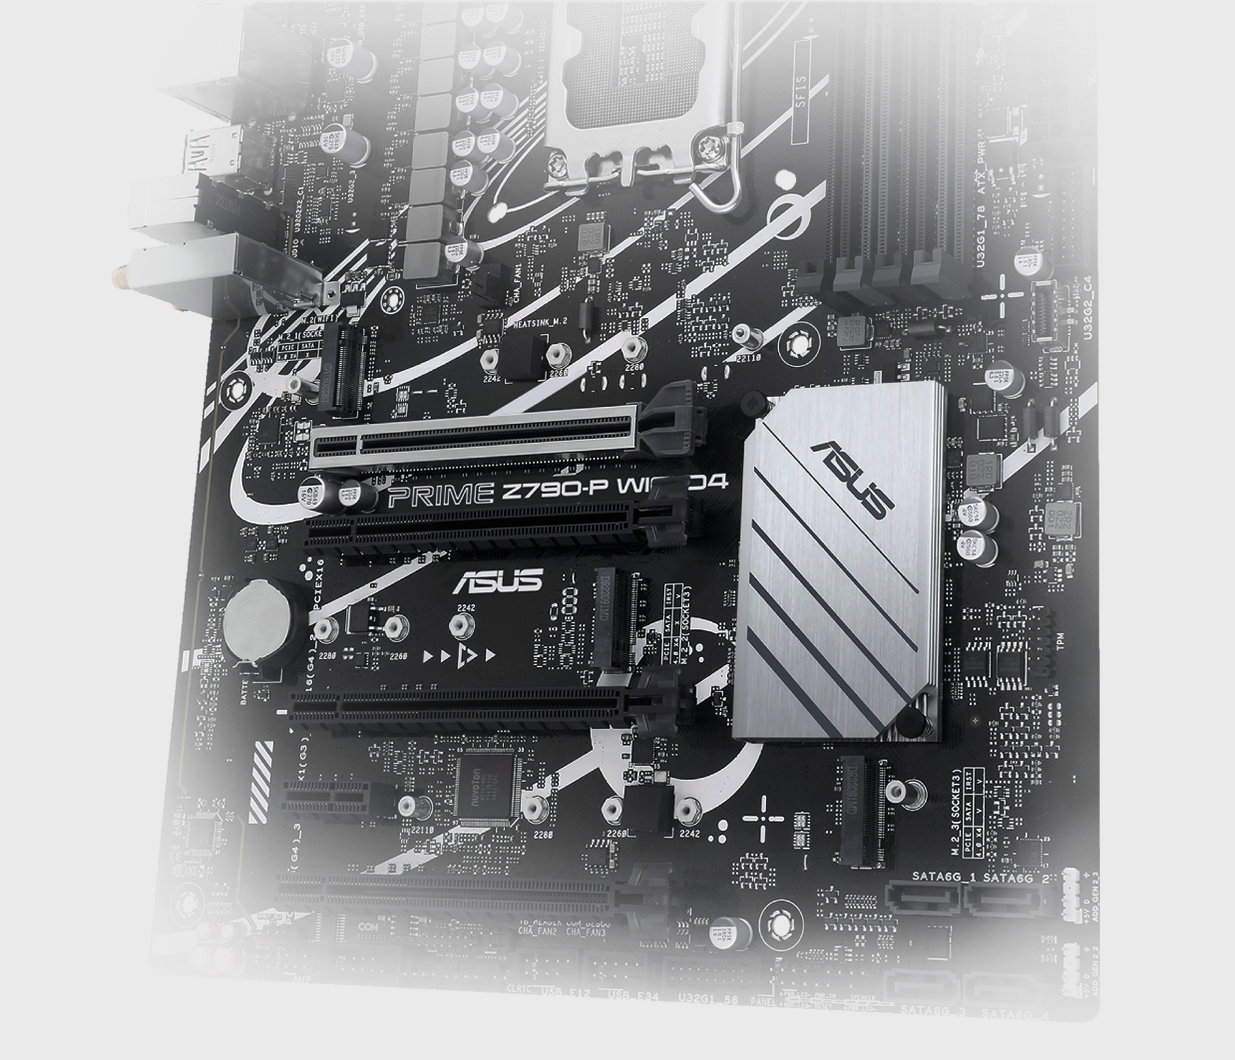 The PRIME Z790-P WIFI D4 motherboard supports three M.2 slots.